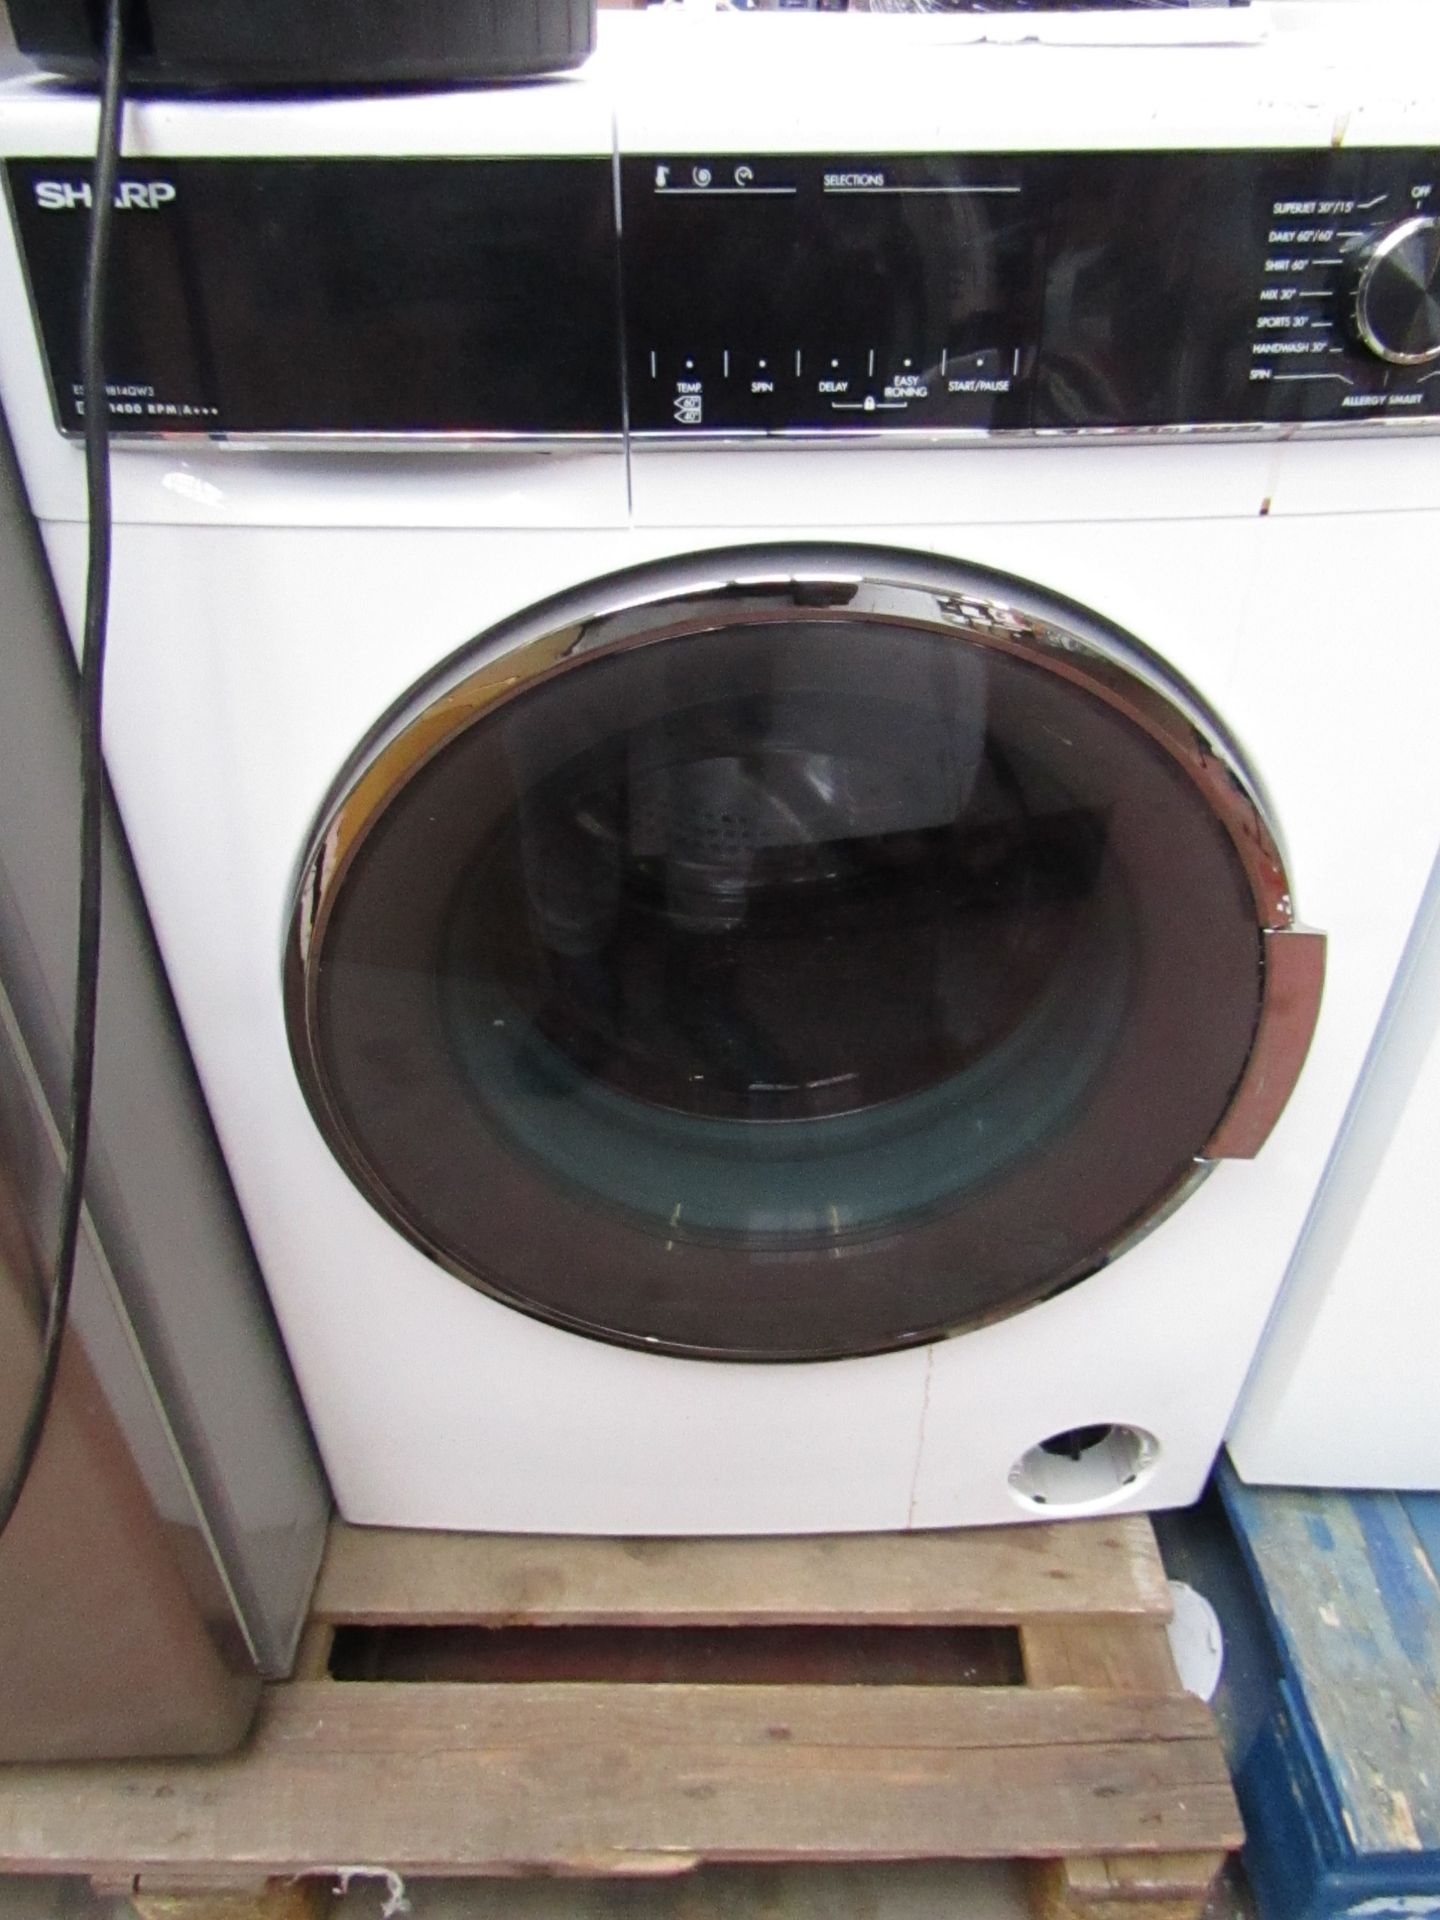 Sharp Washer Dryer ES-HDB8147W0 8 kg - White, powers on and spins. RRP Circa £450:00.